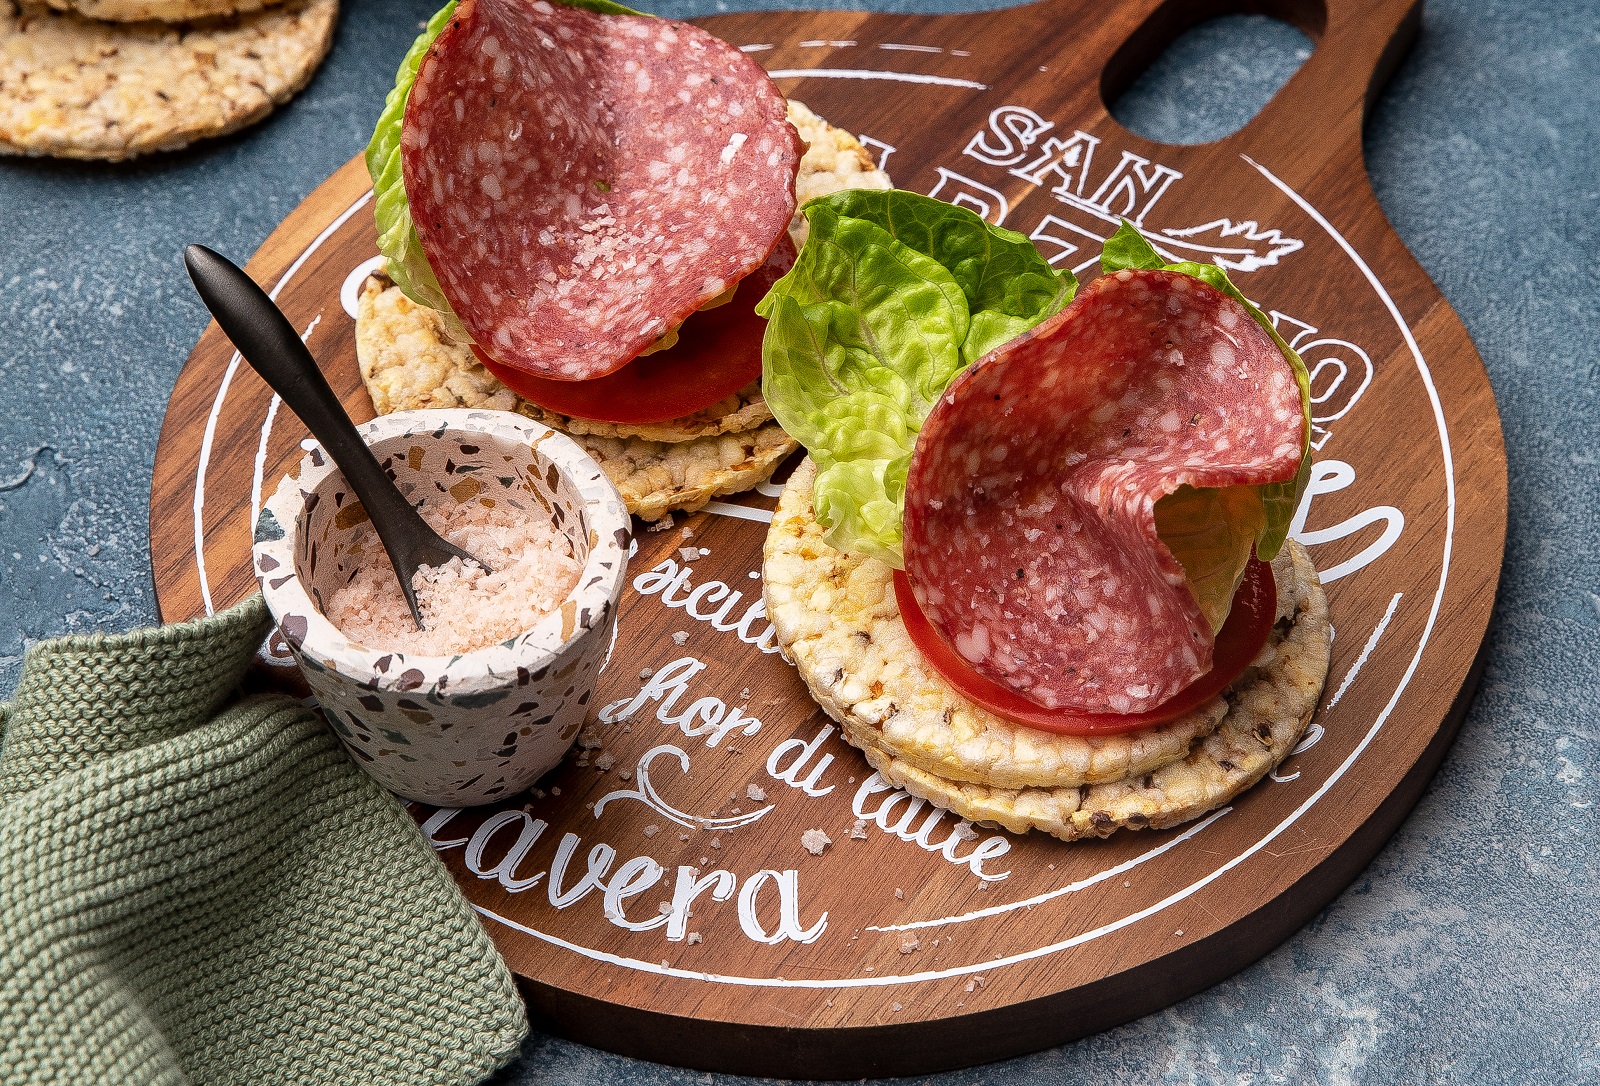 Salami, Tomato & Lettuce on CORN THINS slices for linch